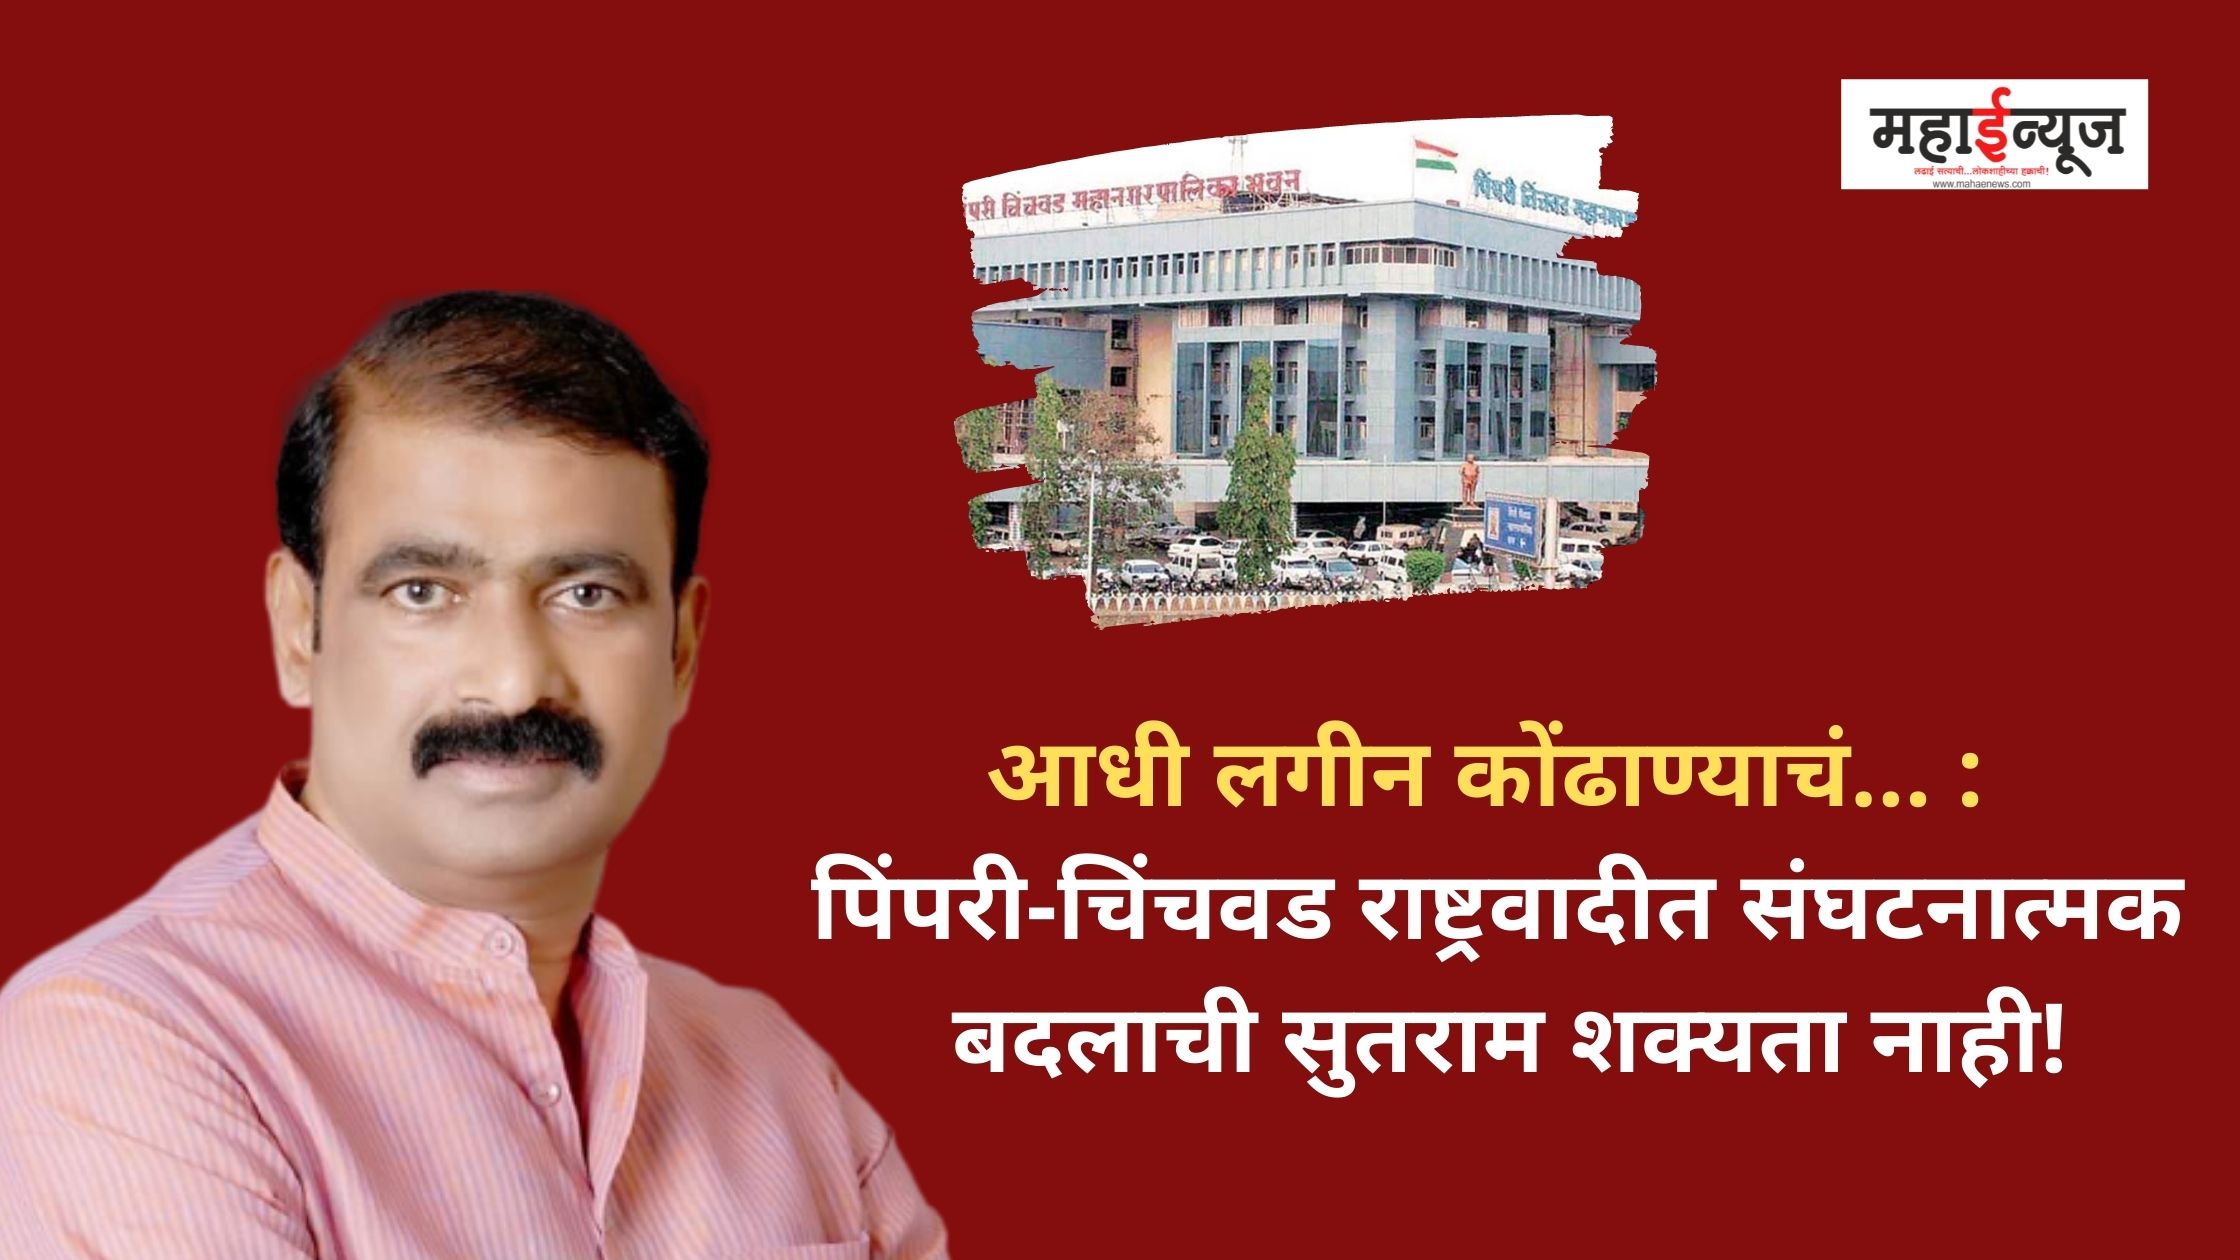 There is no possibility of organizational change in Pimpri-Chinchwad NCP!